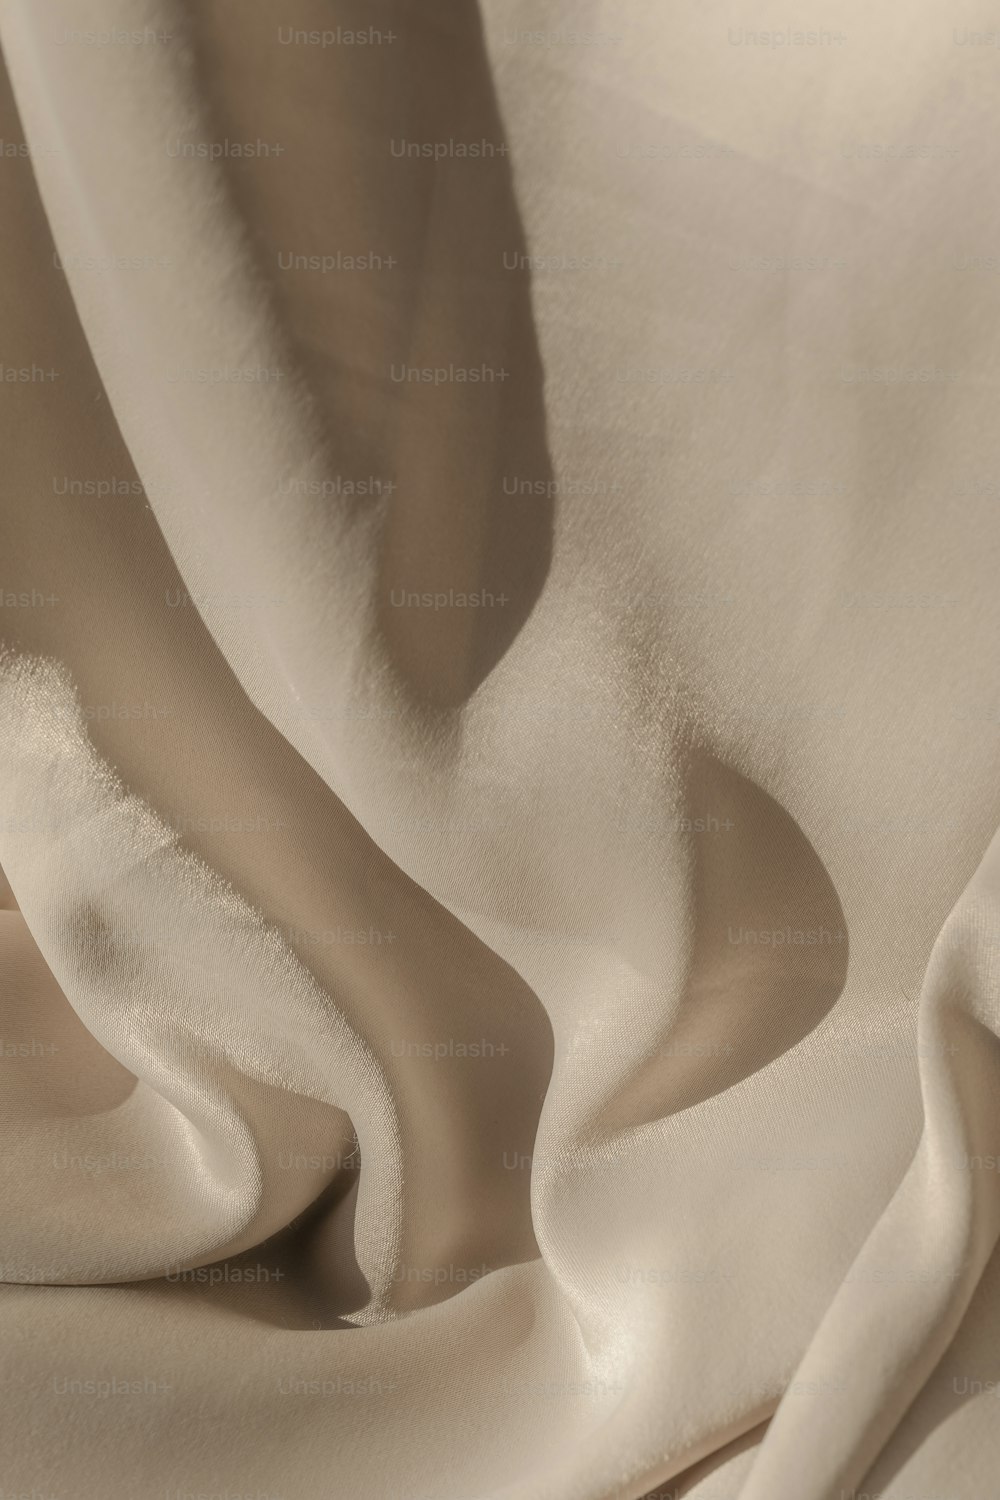 a close up of a white cloth with folds